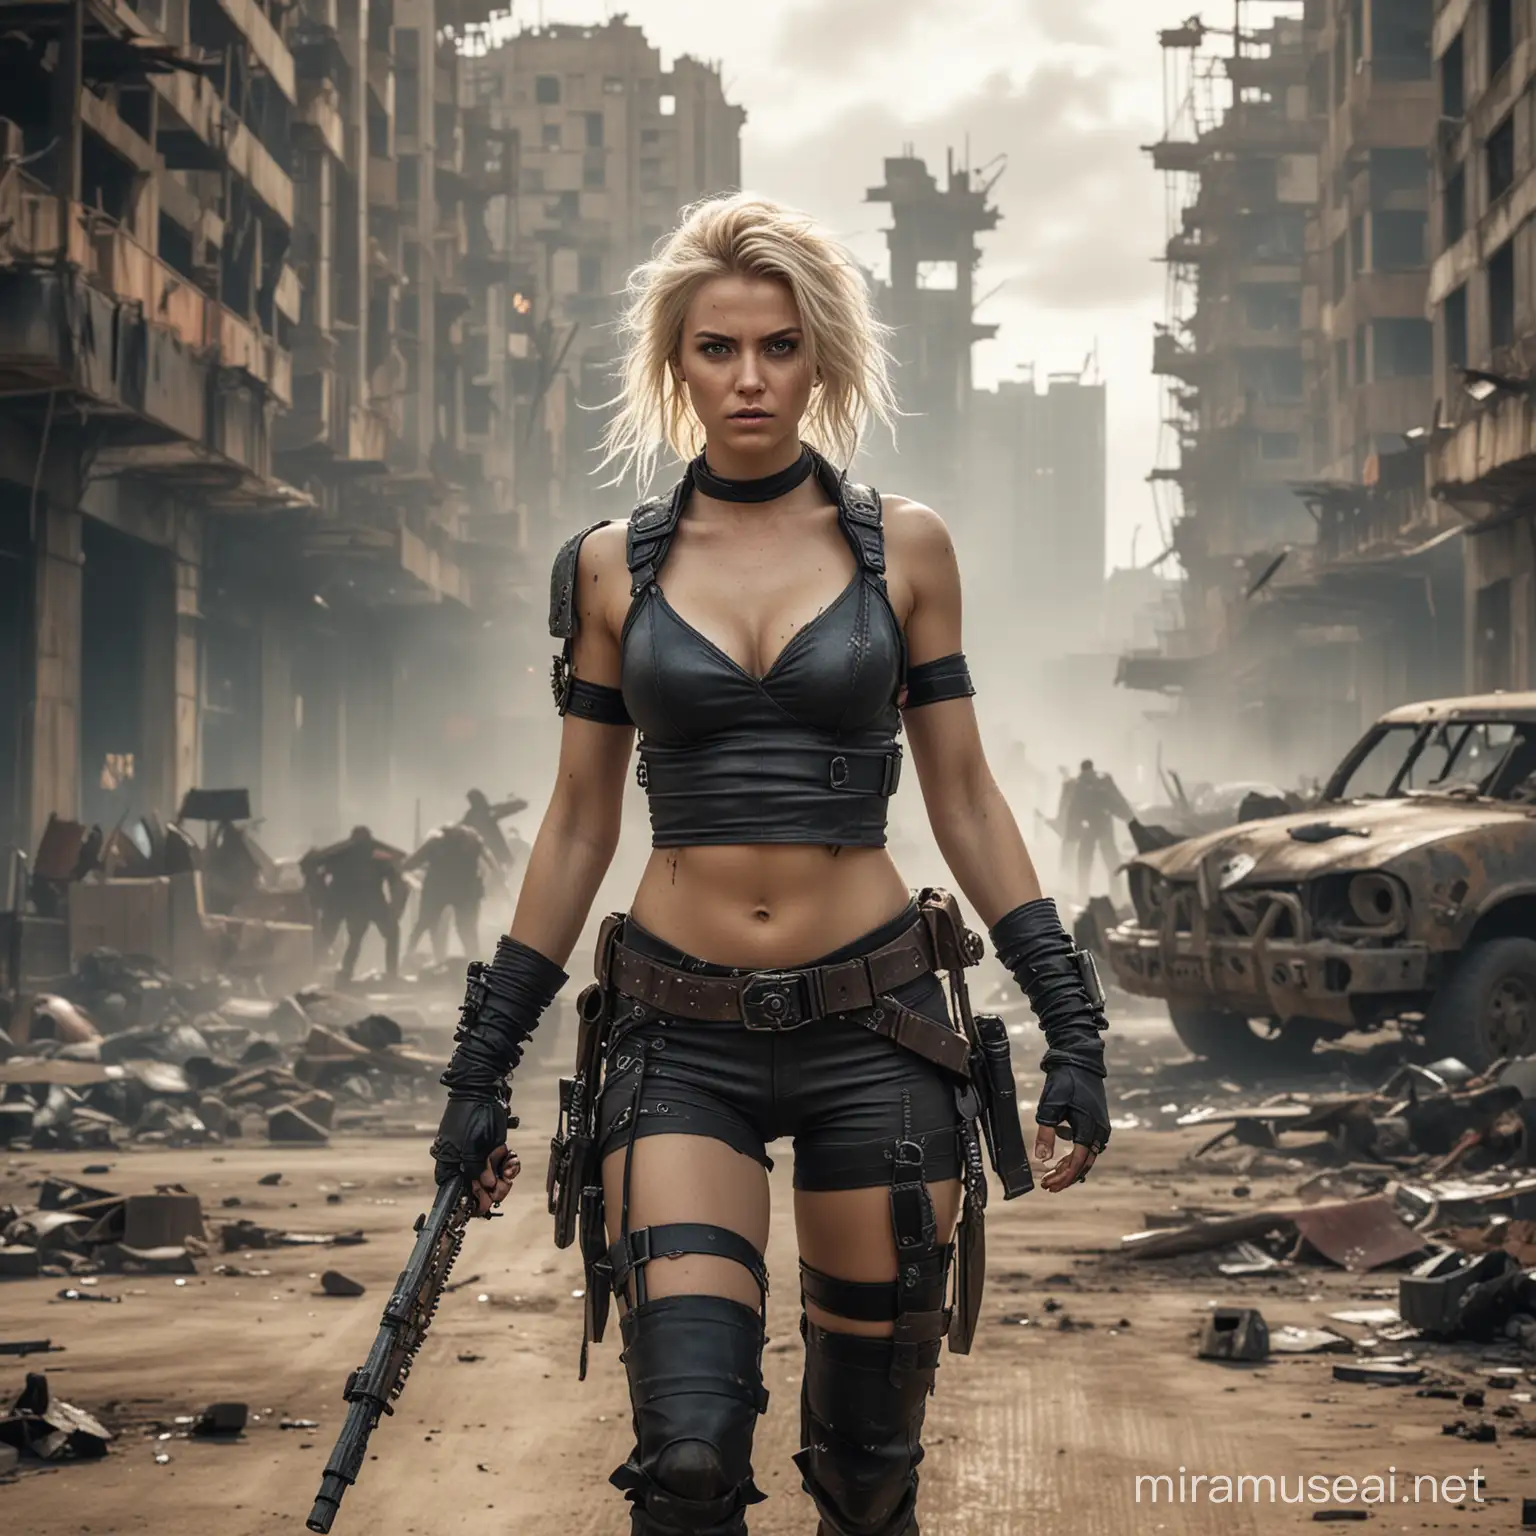   beautiful blond woman in a mad-max outfit fighting  against  zombie in a post-apocalyptic world, The location is a cyberpunk city with ruined skyscrapers.  8k uhd, dslr, film grain, Fujifilm XT3, (best quality:1.3), (masterpiece:1.1), high resolution, cinematic light, intricate details, (photorealistic)

 